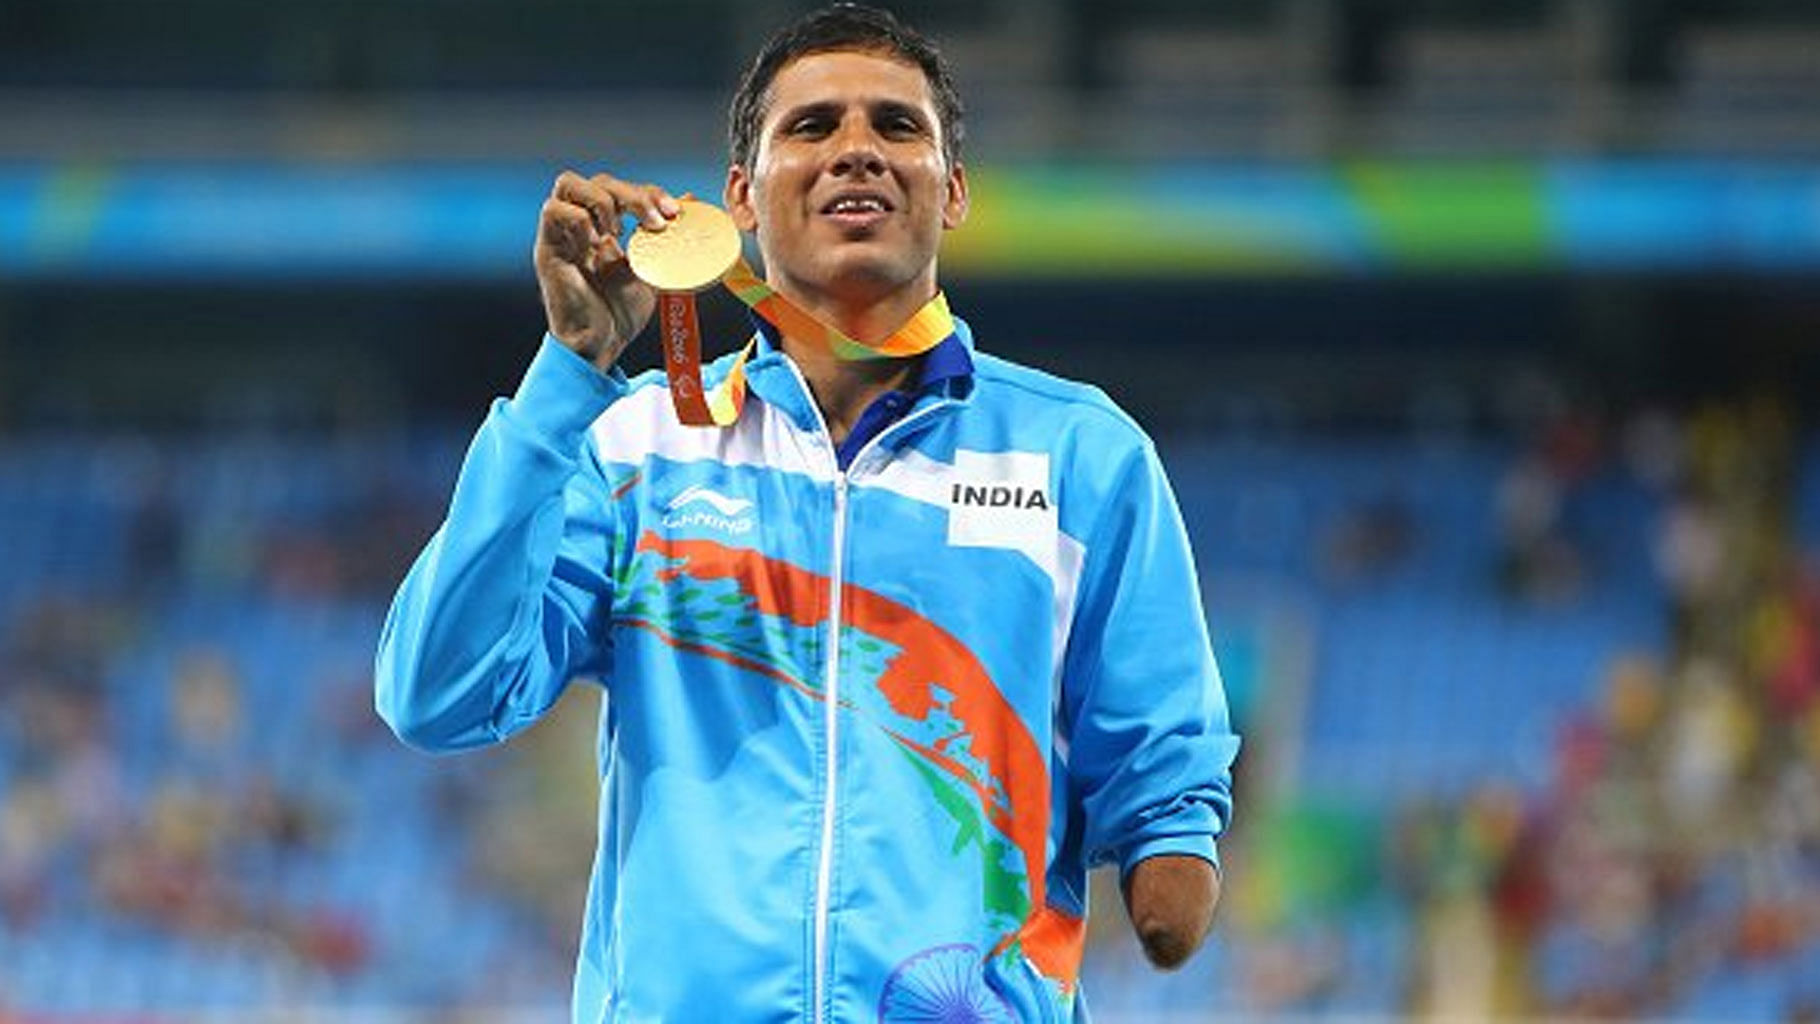 <div class="paragraphs"><p>India’s Javelin thrower Devendra Jhajharia has won two Paralympic gold medals</p></div>